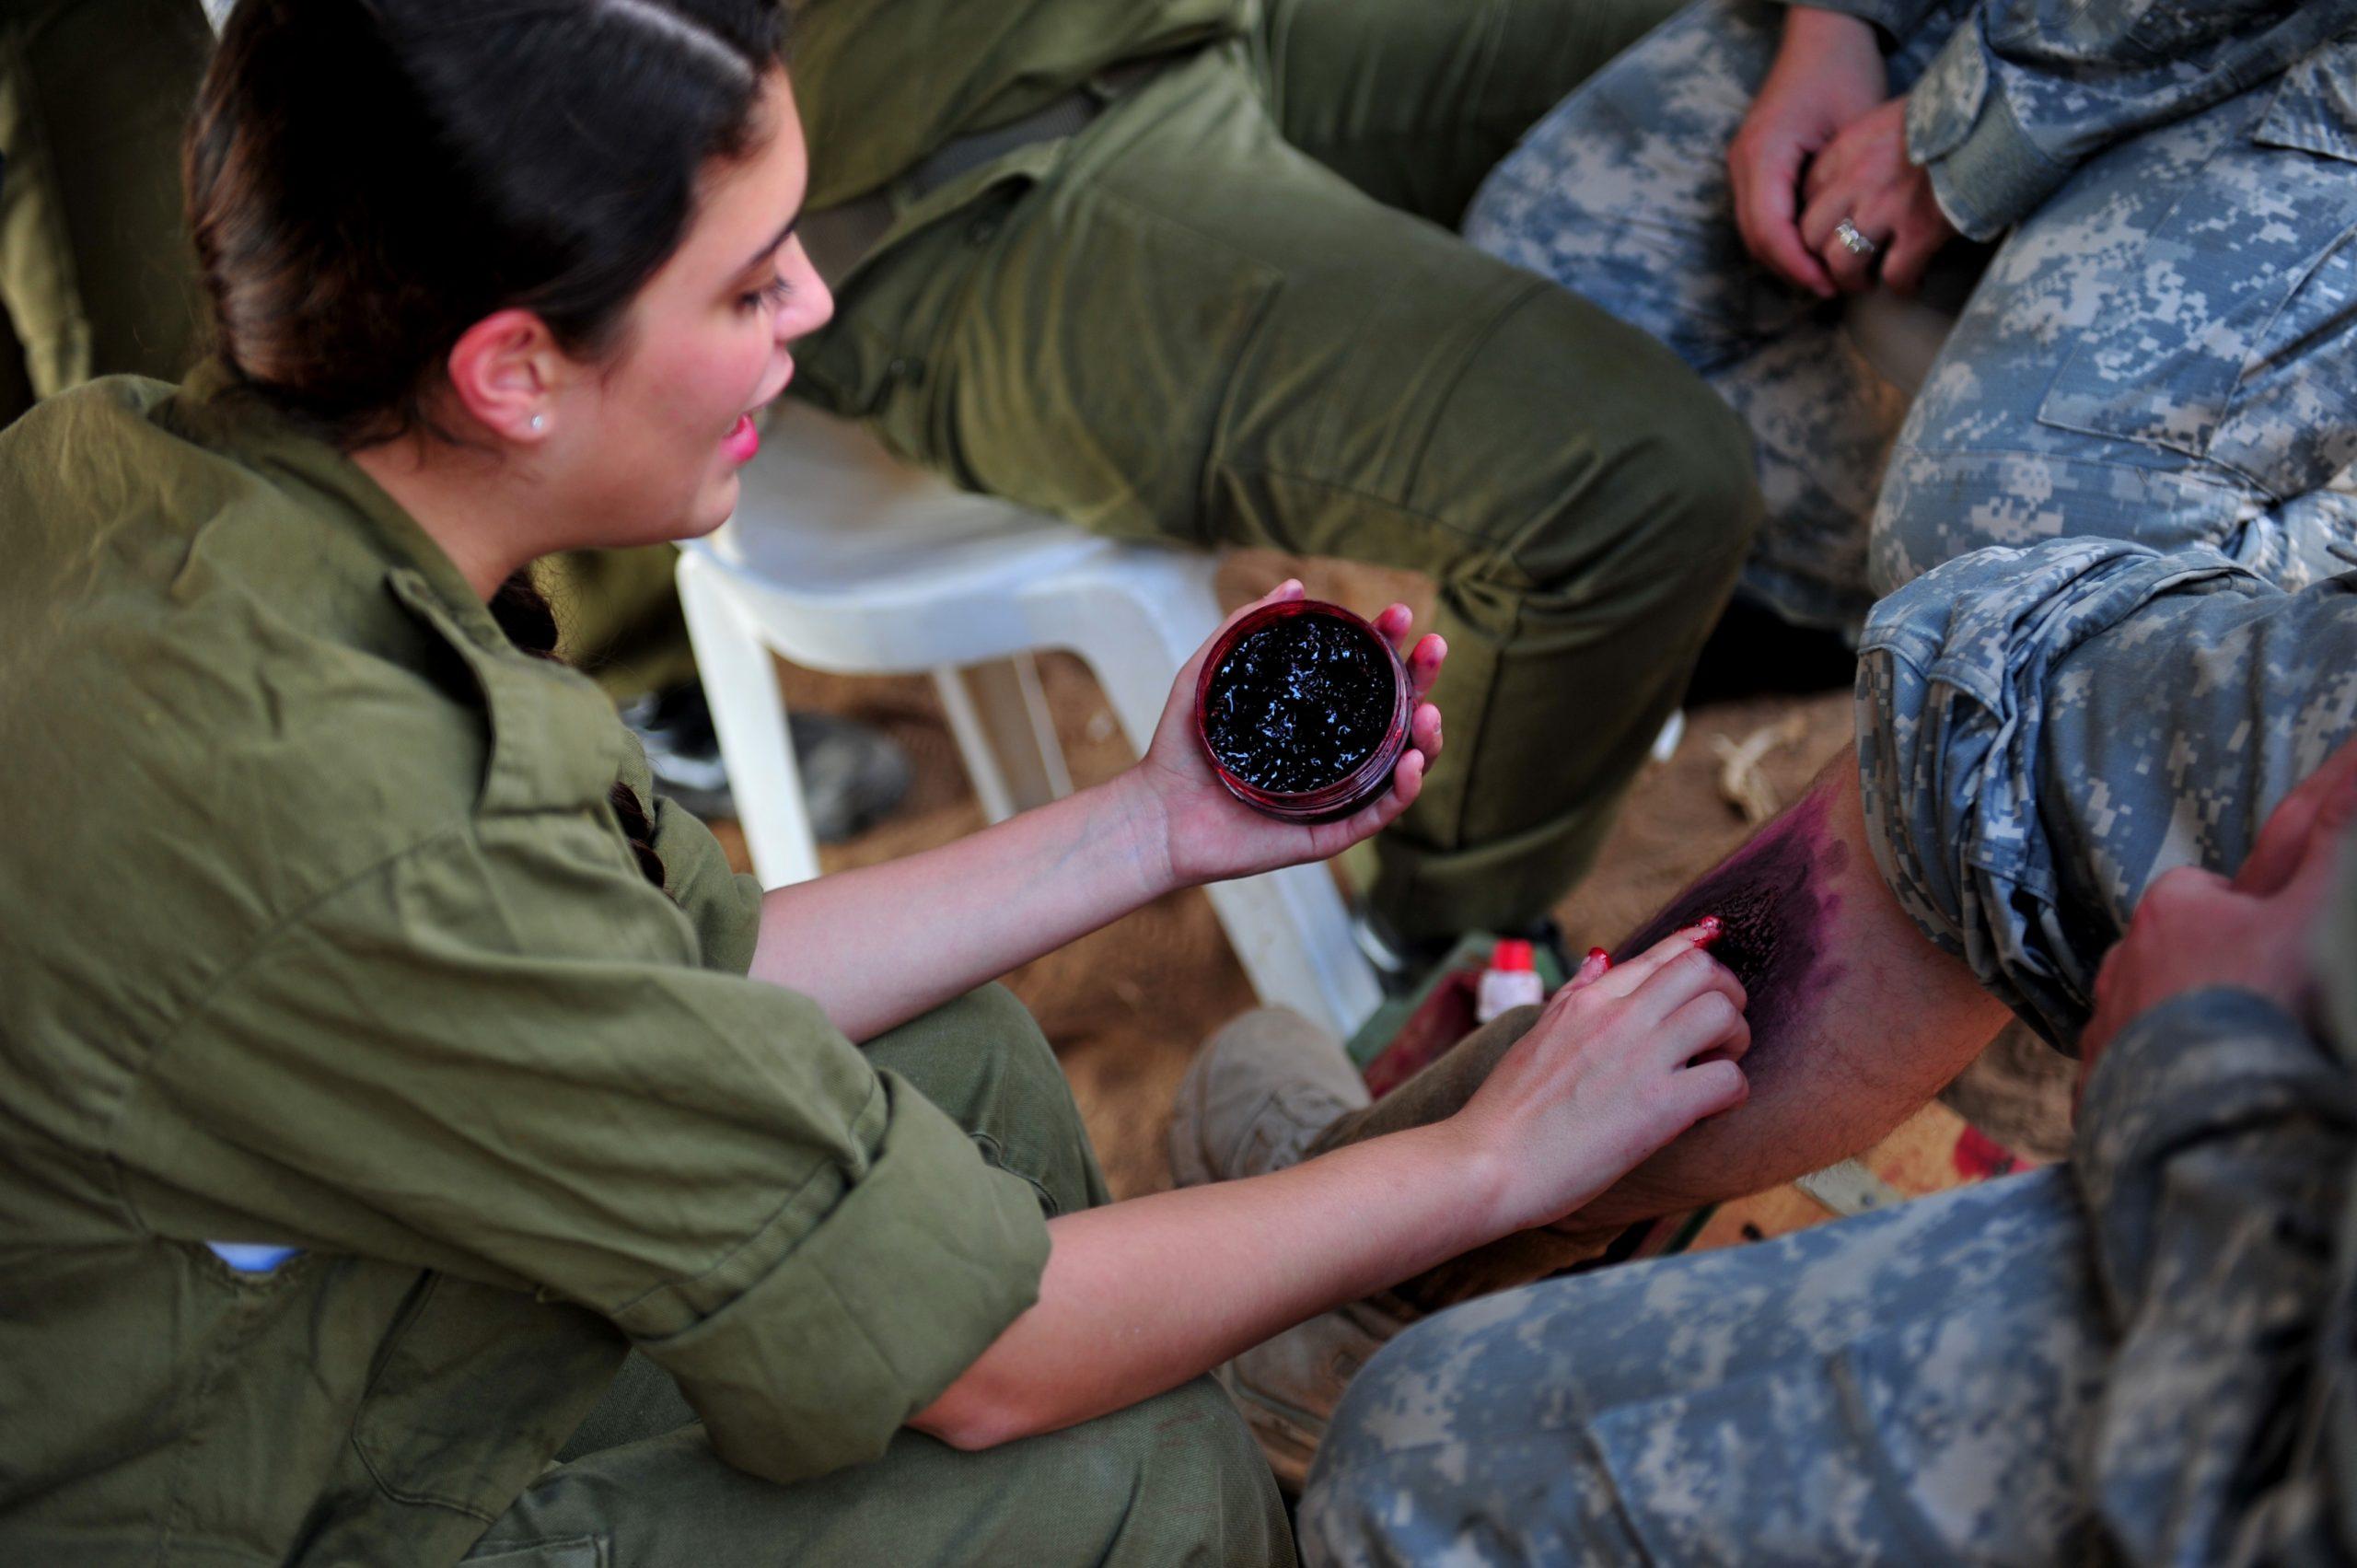 File:An Israeli soldier, left, applies makeup to simulate wounds on a U.S. Soldier for his role in a medical exercise for Austere Challenge 2012 in Beit Ezra, Israel 121022-F-QW942-025.jpg - Wikimedia Commons